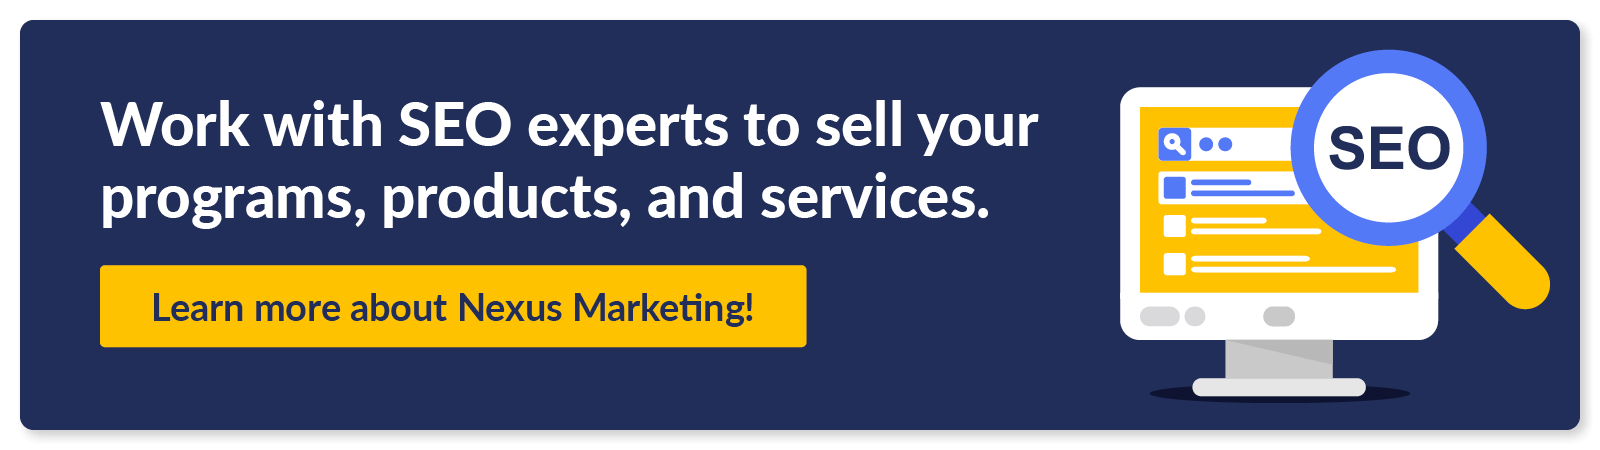 Work with our recommended SEO experts to sell your programs, products, and services.